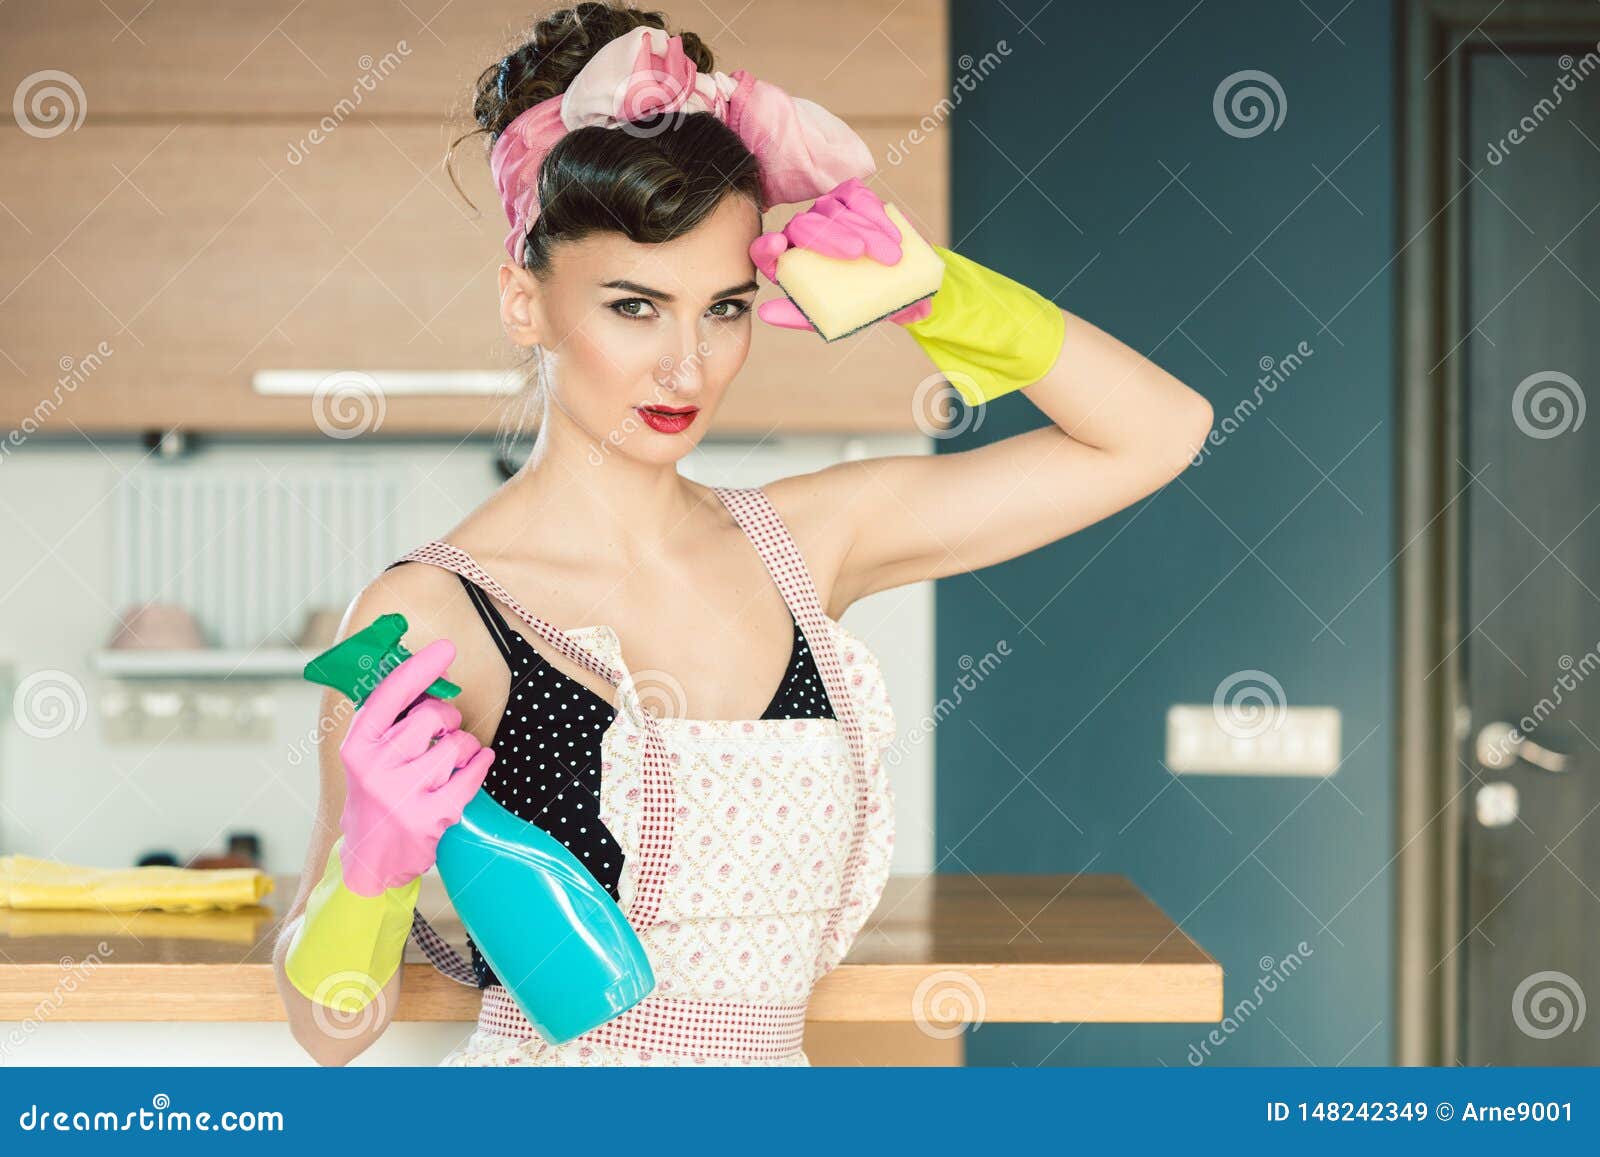 Housewife Woman in Retro Outfit Attempting To Clean the Kitchen Stock Image 